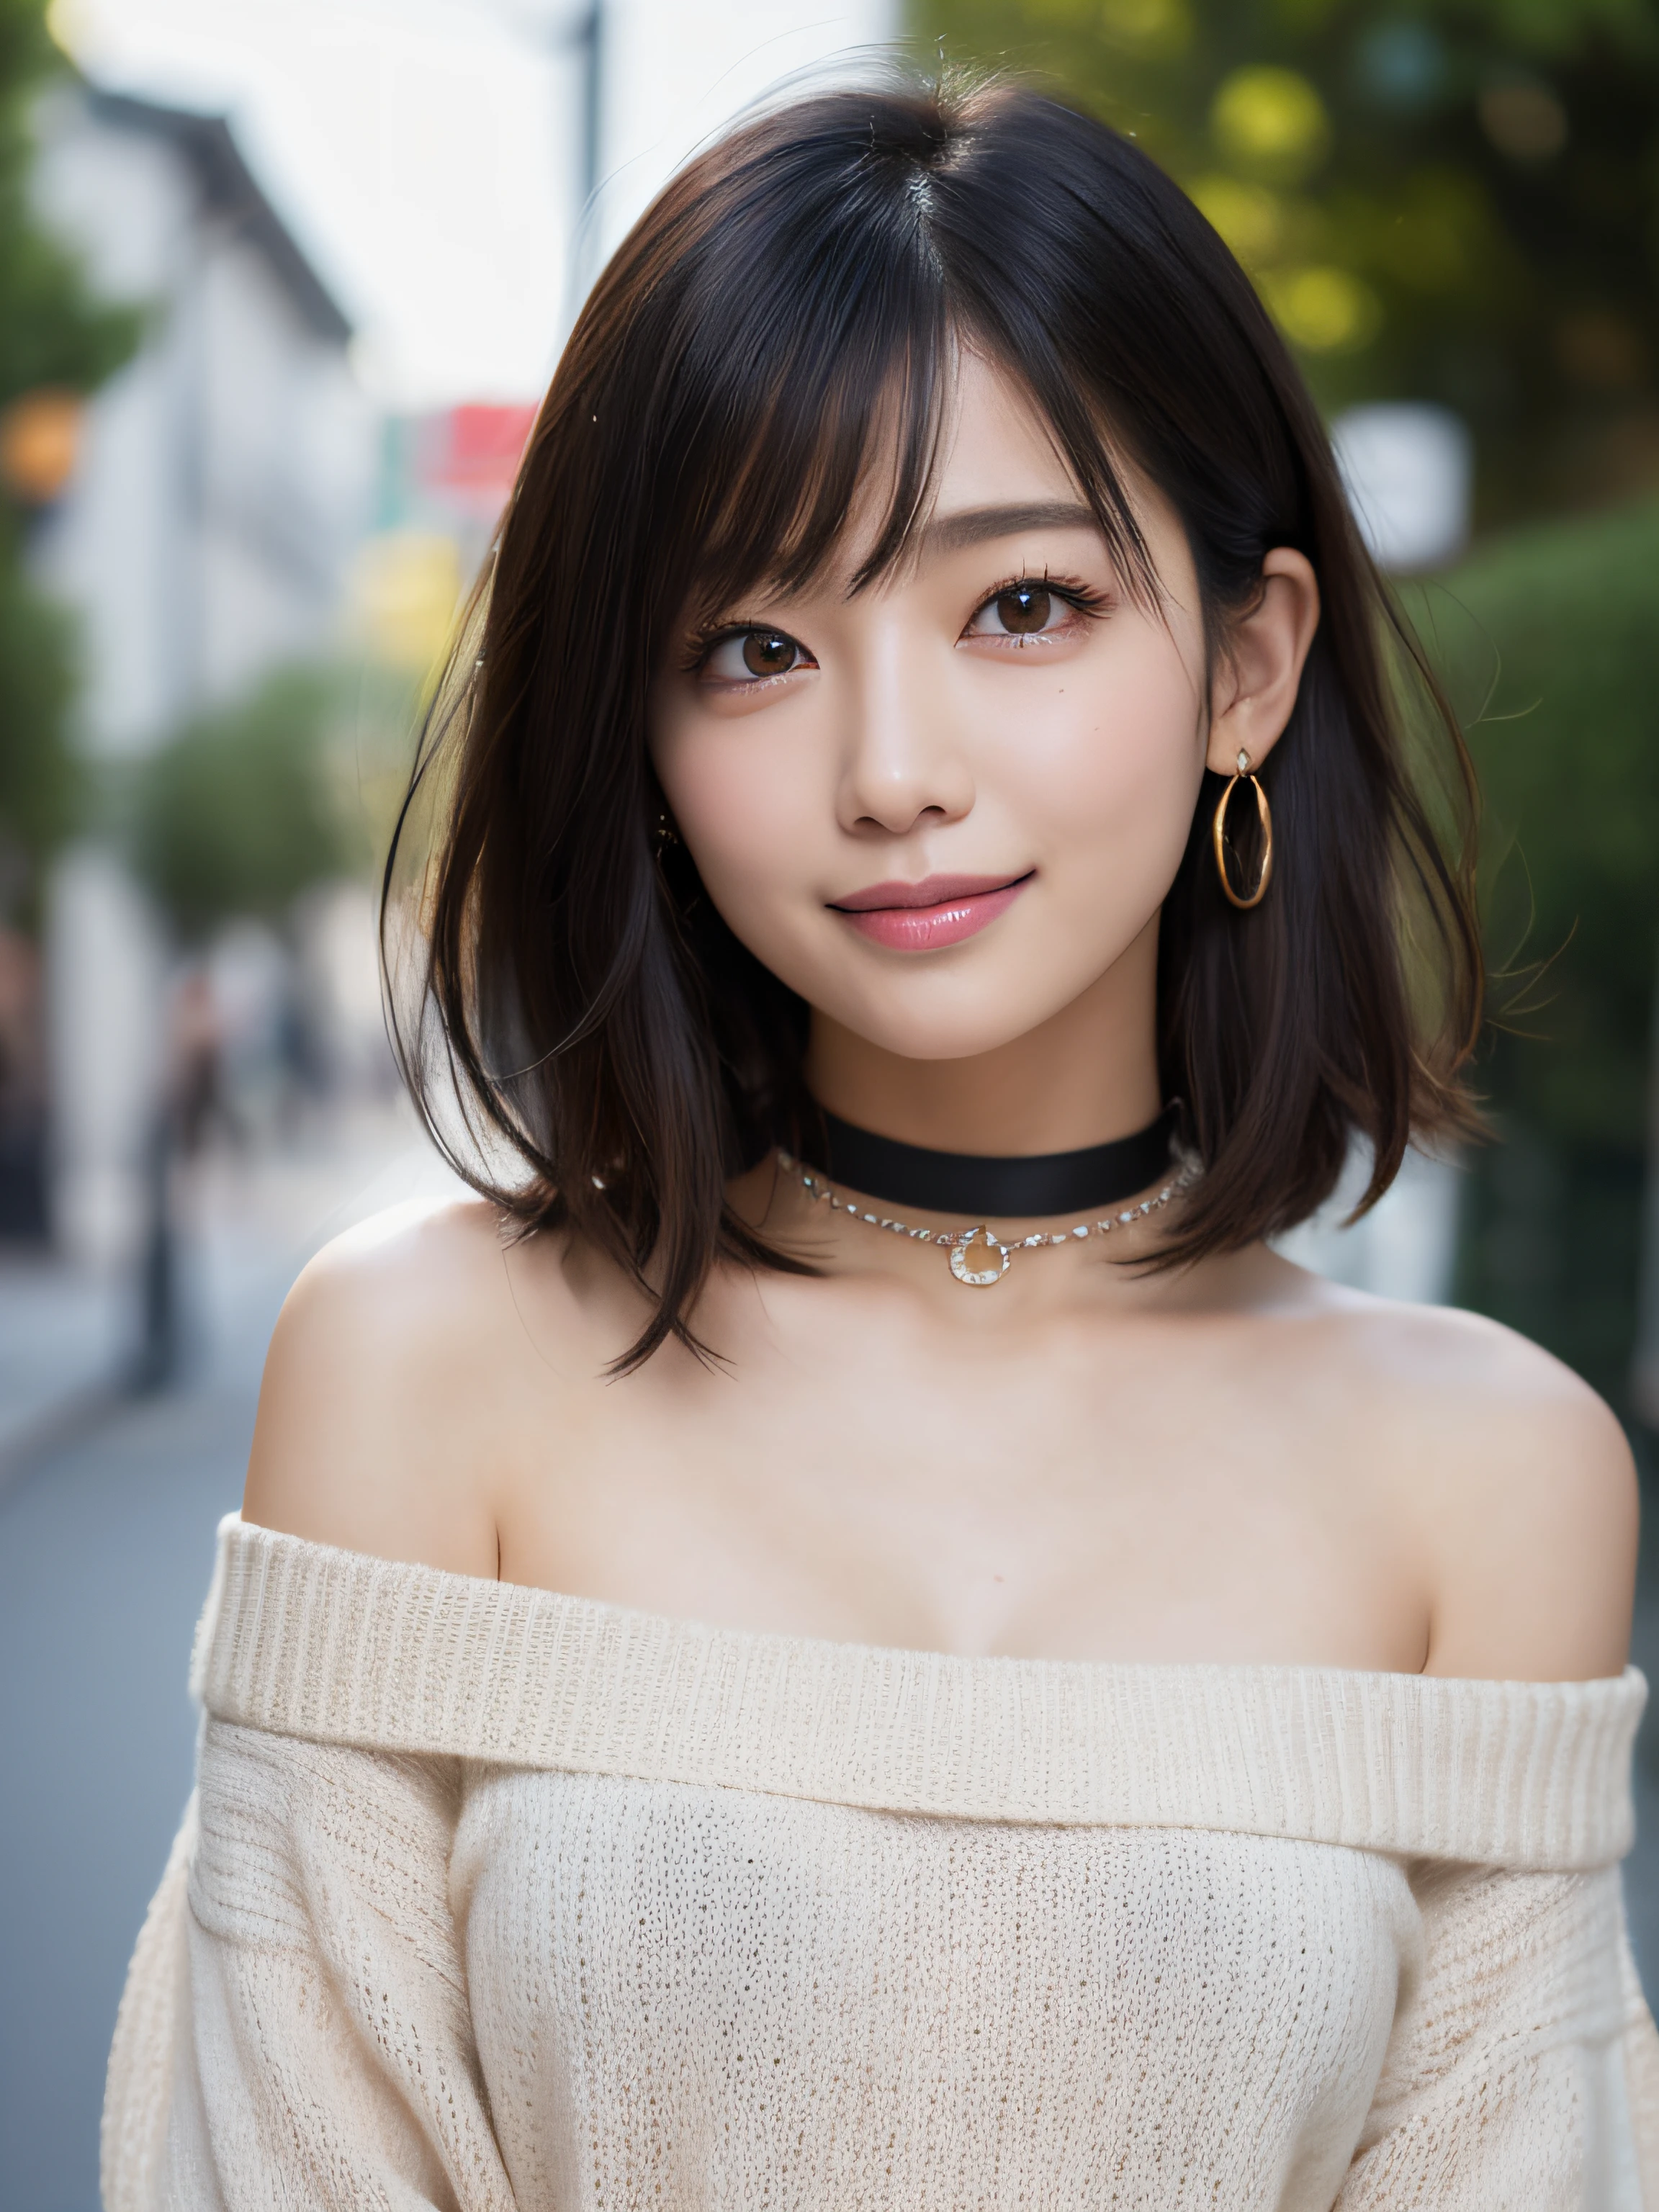 of the highest quality, masutepiece, Ultra High Resolution, Photorealistic, 1 girl, off shoulders, knit, Smile, Smile, slightly visible, Oversized_Sweaters, Soft lighting, Detailed skin, Bangs, Black hair, Clear eyes, Short bob hair, Transparency, Japan, Korean, Beautiful woman, Upper Eyes, Lip gloss, Black Chic Choker, Teardrops,  Highlights in the eyes